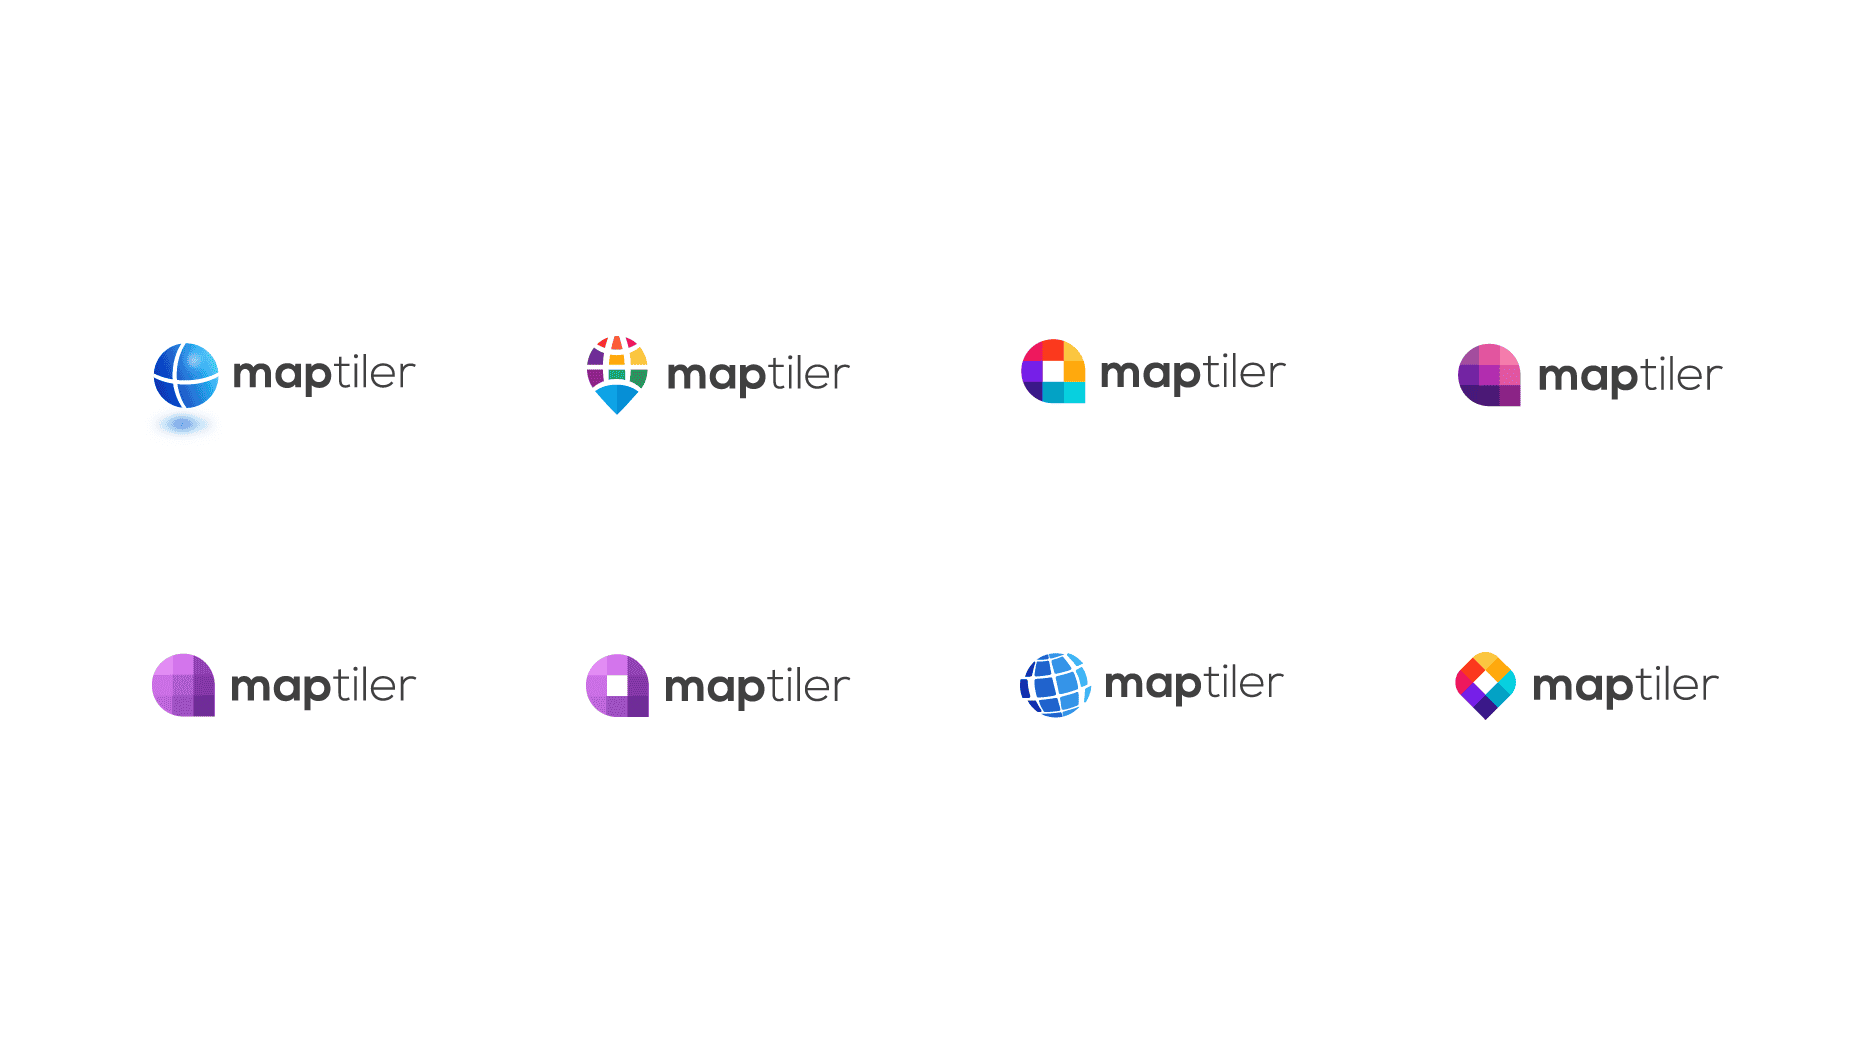 2018-08-07-the-new-visual-identity-of-maptiler-3.png